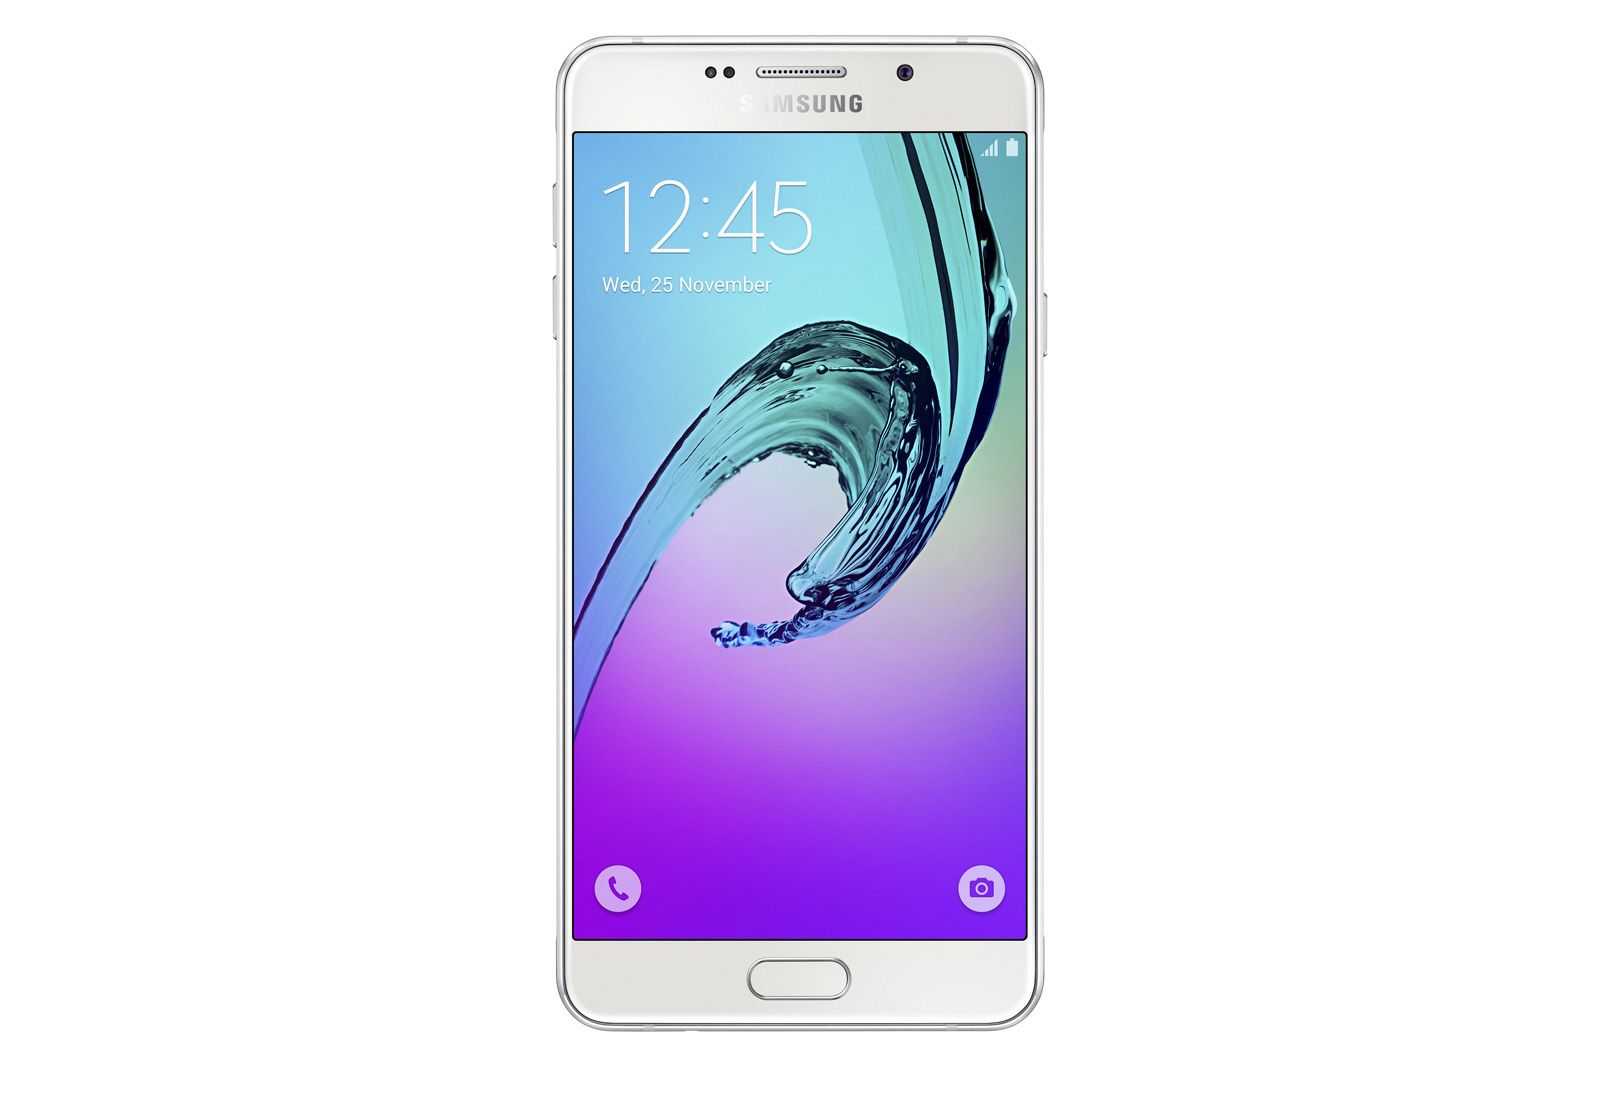 samsung refreshes galaxy a smartphone line up with new a3 a5 and a7 phones for 2016 image 1